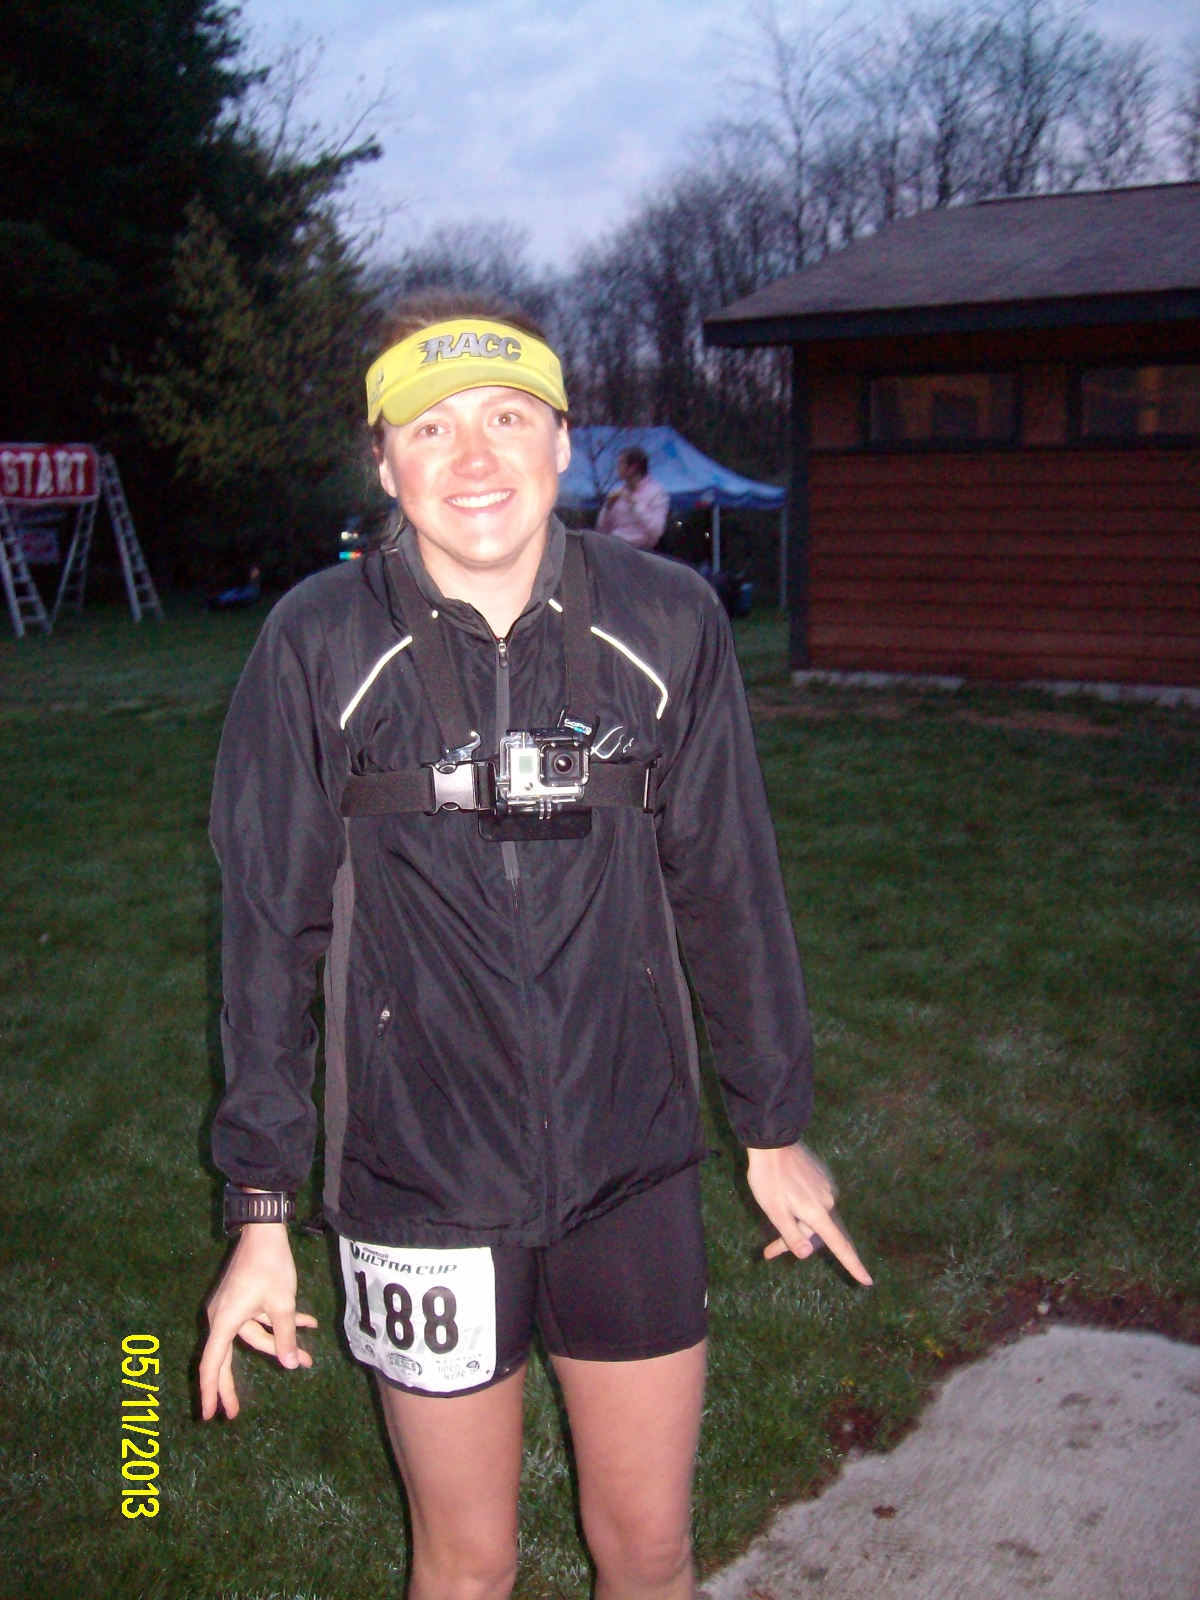 Sara's Blog: Ice Age Trail 50 Race Report Part 1